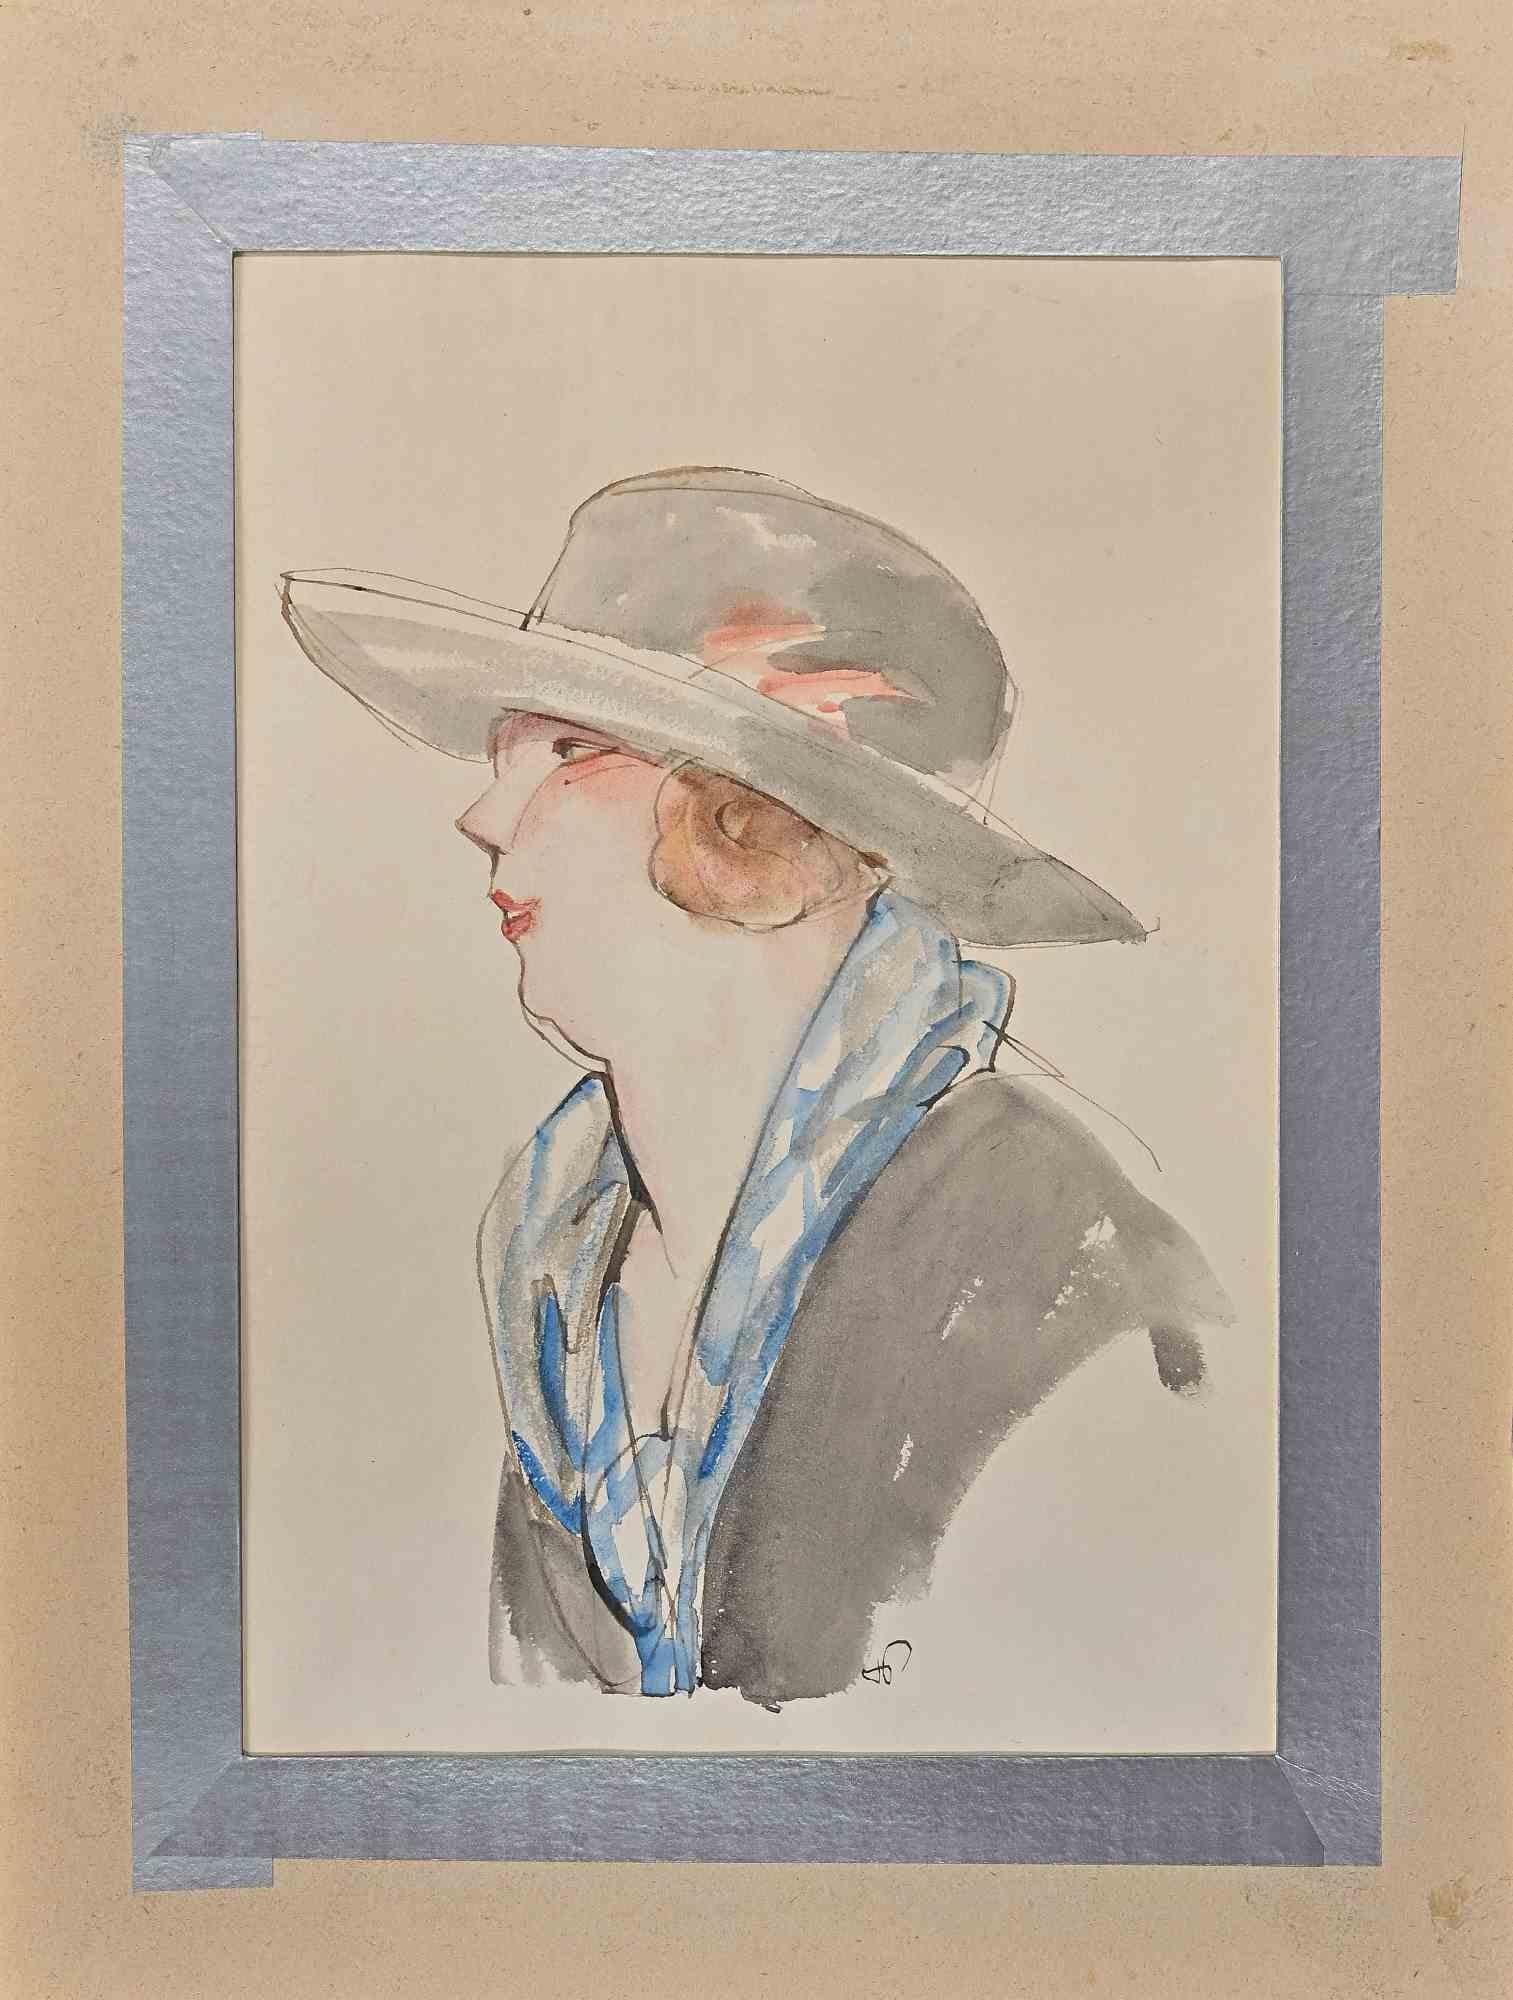 Portrait of a Lady is a pencil, ink and watercolor drawing realized by Hermann Paul.

Hand signed on the lower right corner. Passpartout included cm 40.5x30.5

Good condition.

René Georges Hermann-Paul (27 December 1864 – 23 June 1940) was a French